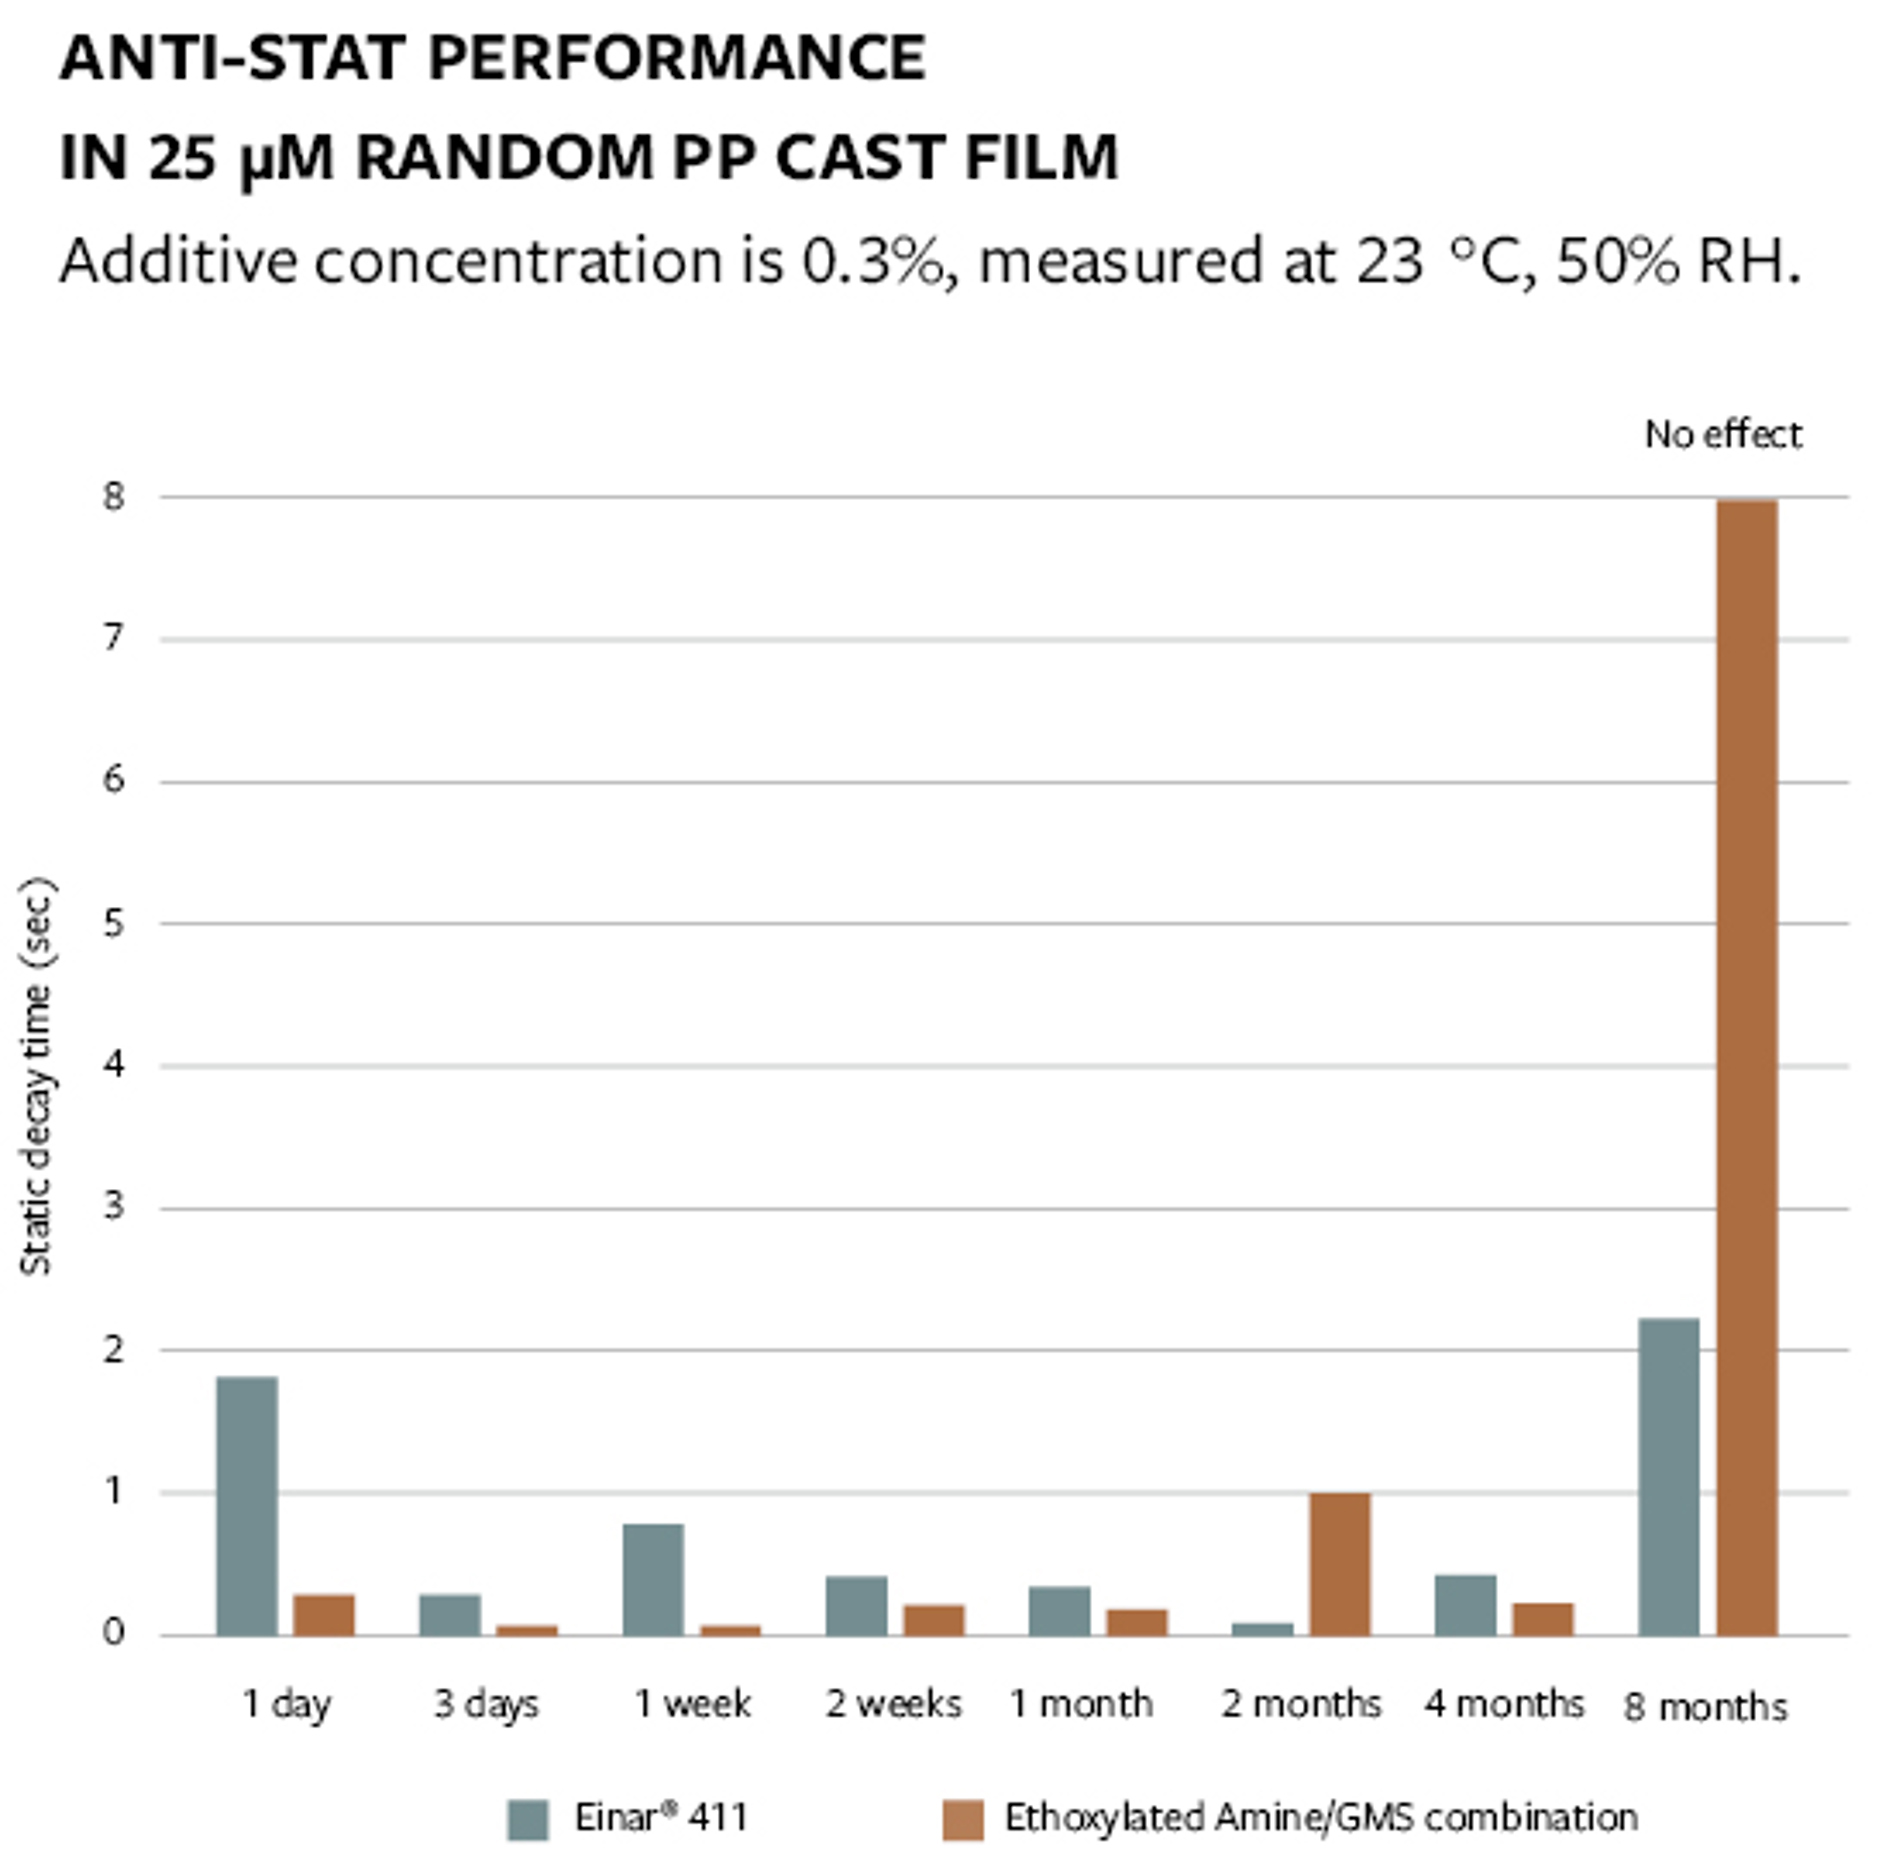 Einar® 411 is an excellent performer in PP film with both immediate and long-term performance